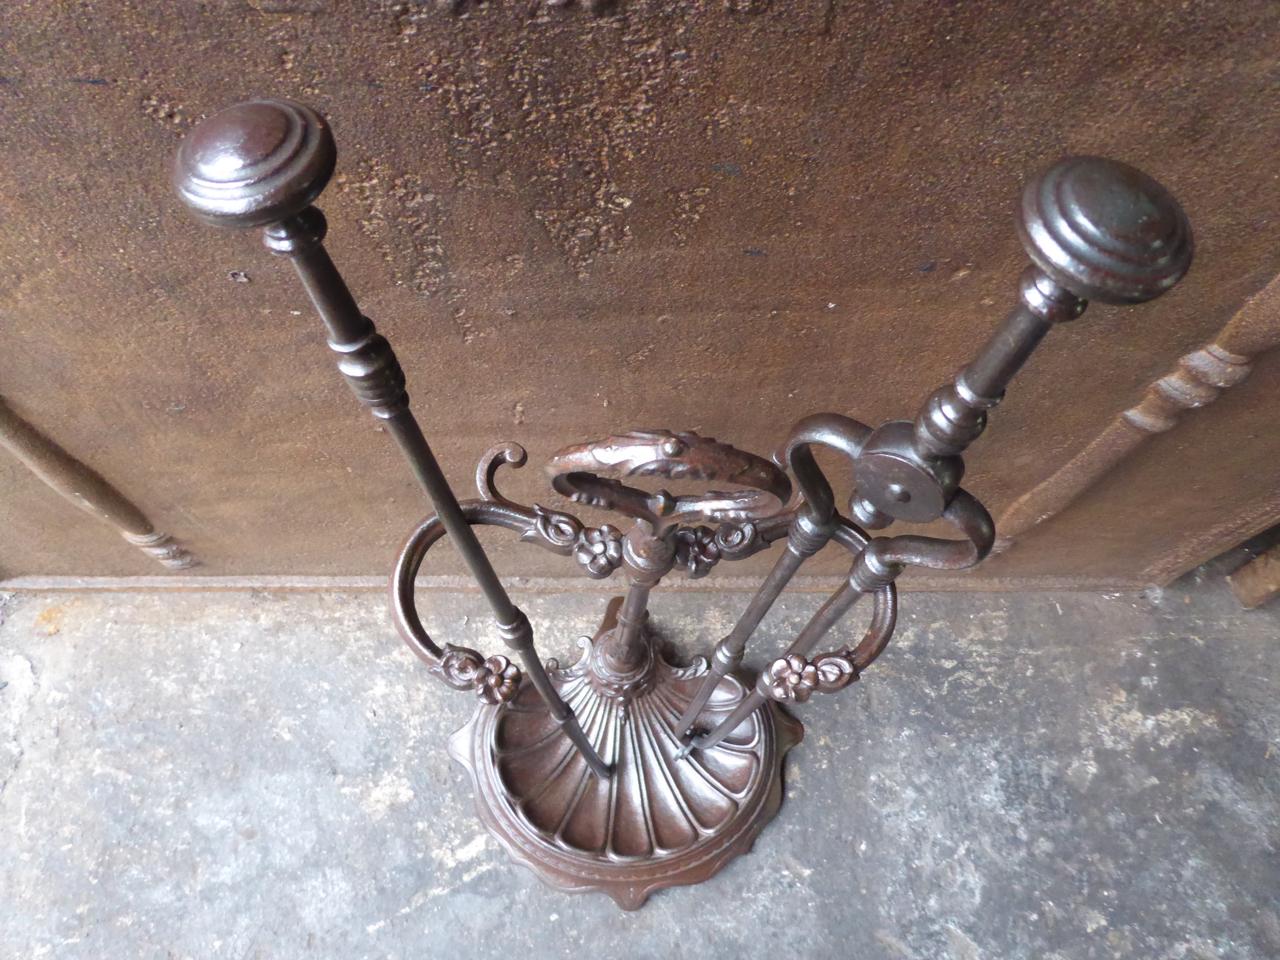 19th century English Victorian fireplace tool set. The fireplace companion set consists of a stand with two fireplace tools. It is made of cast iron and wrought iron. The fire irons are in a good condition and are fully functional.

We have a unique